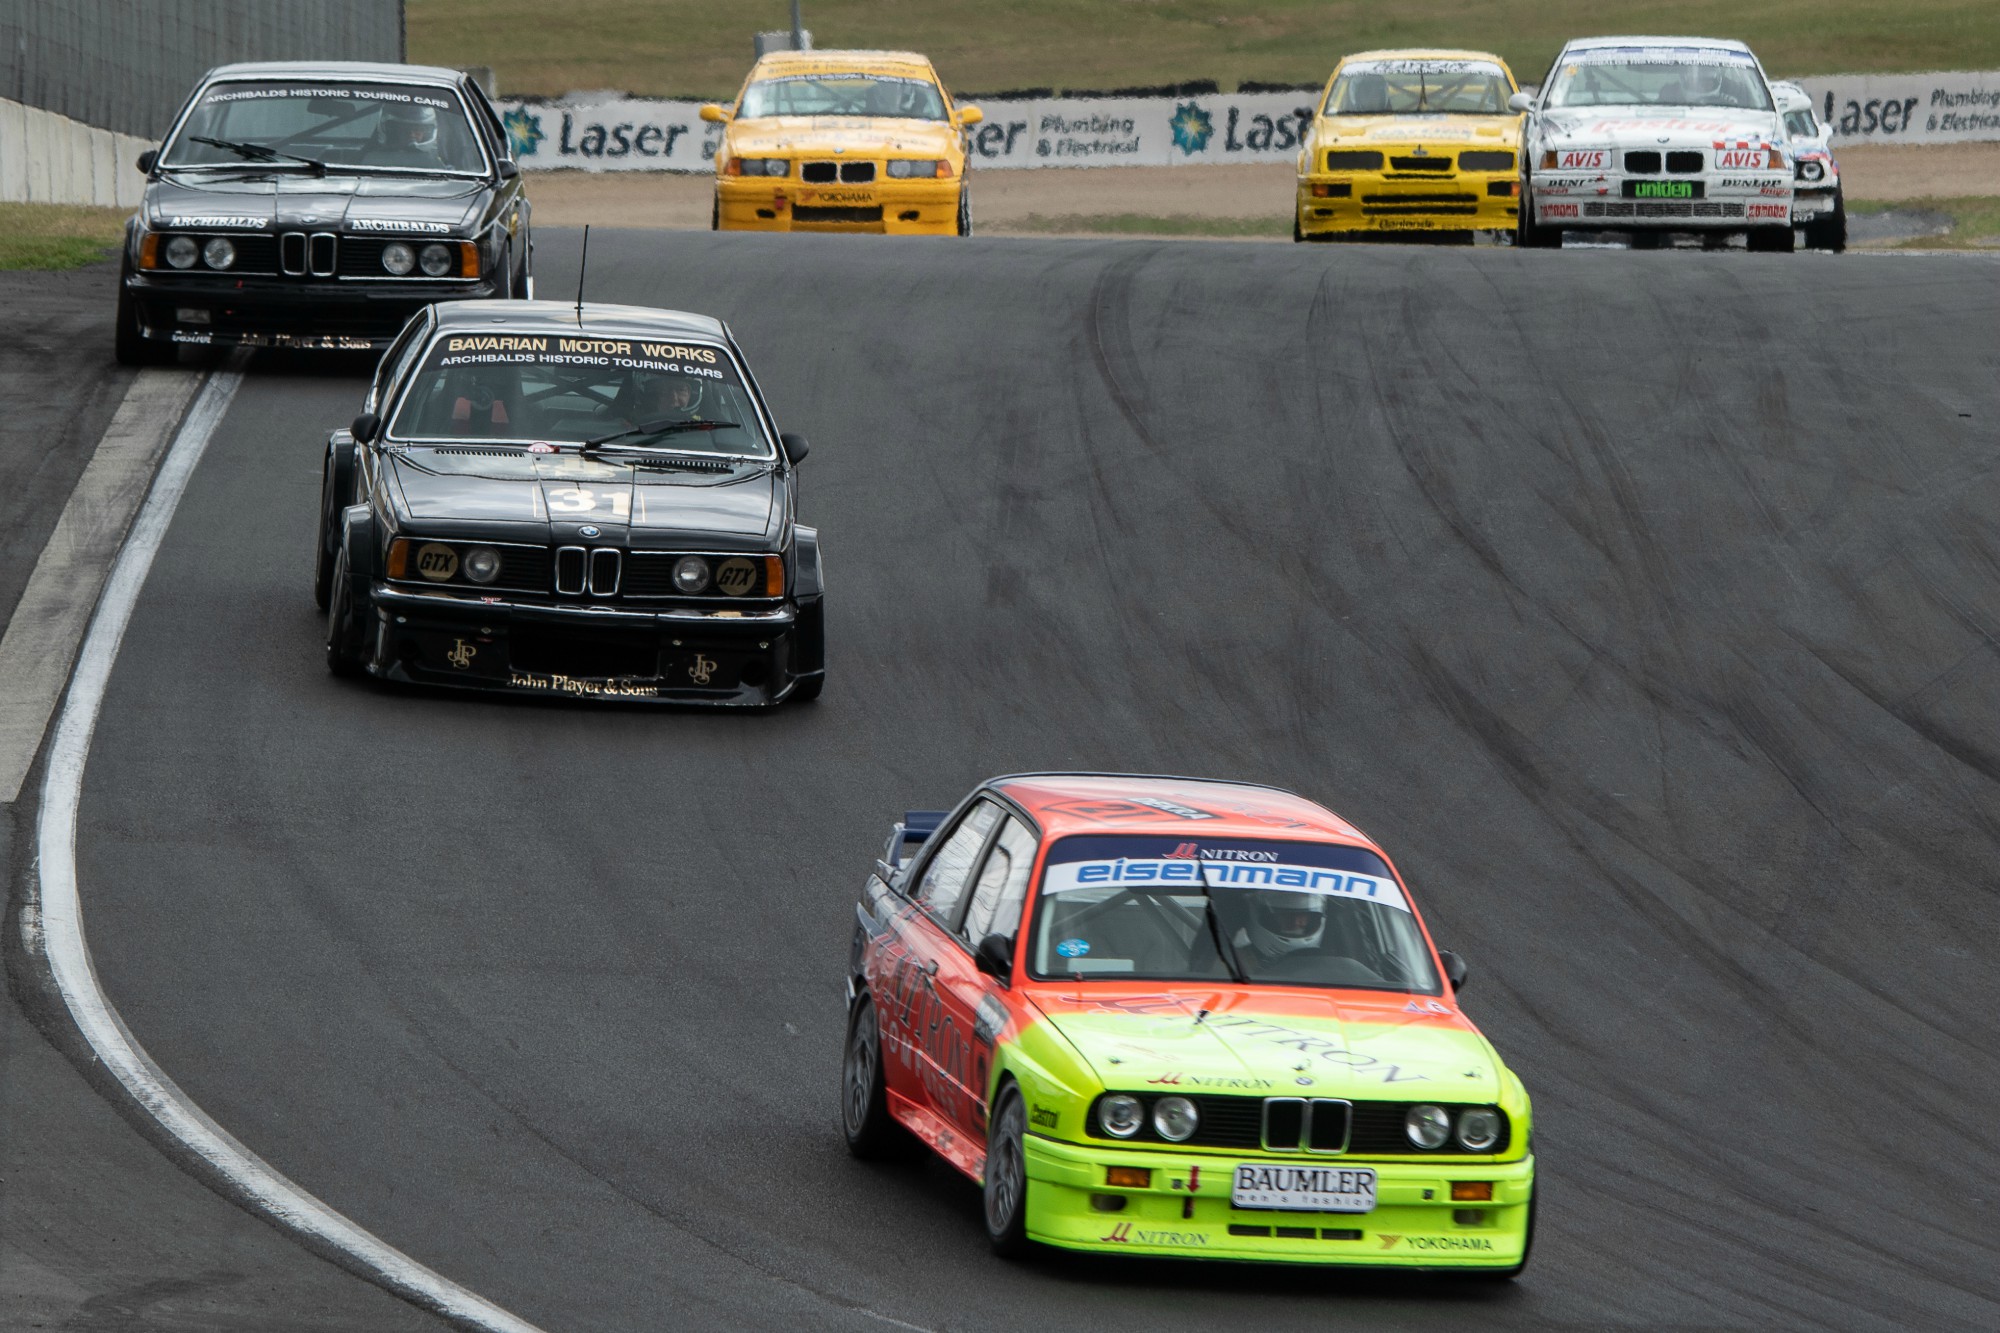 BMW M3 leads 635 CSi in the midfield